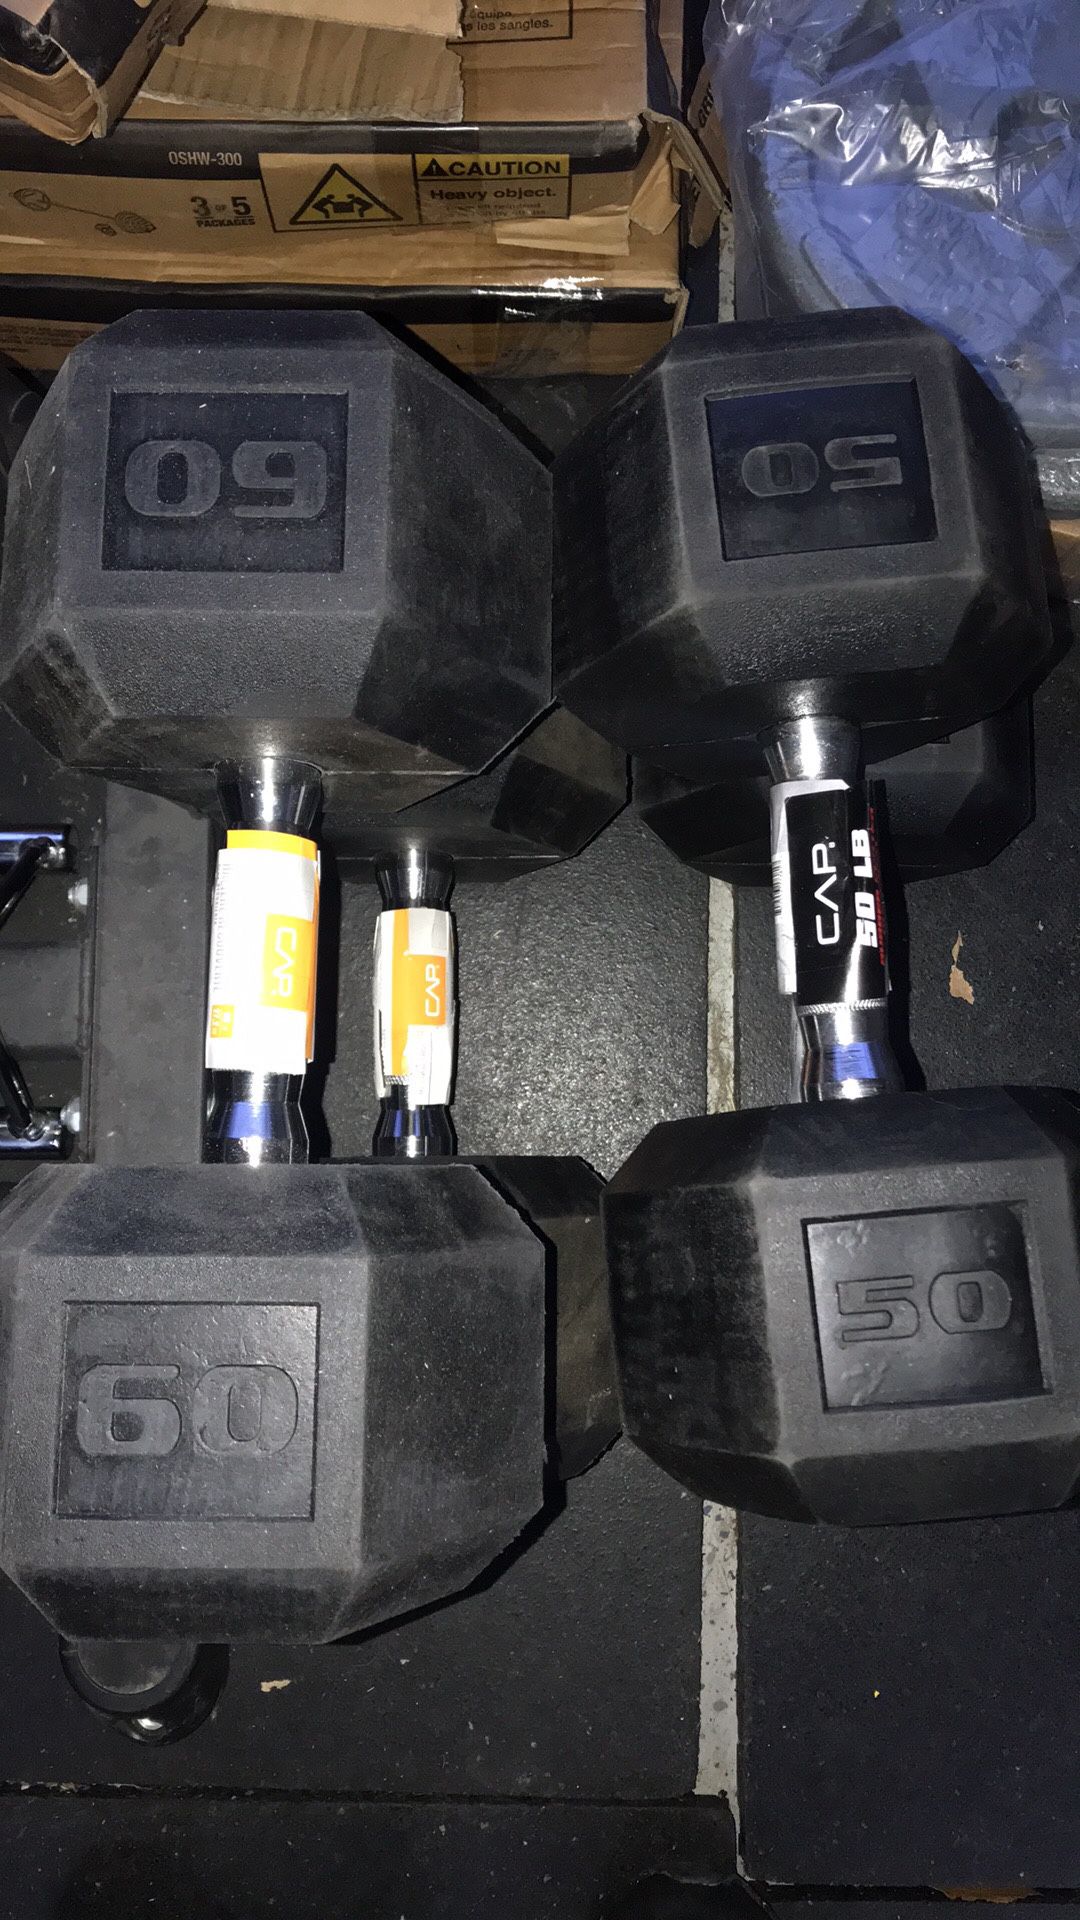 pair of 50 and 60 pound dumbbells